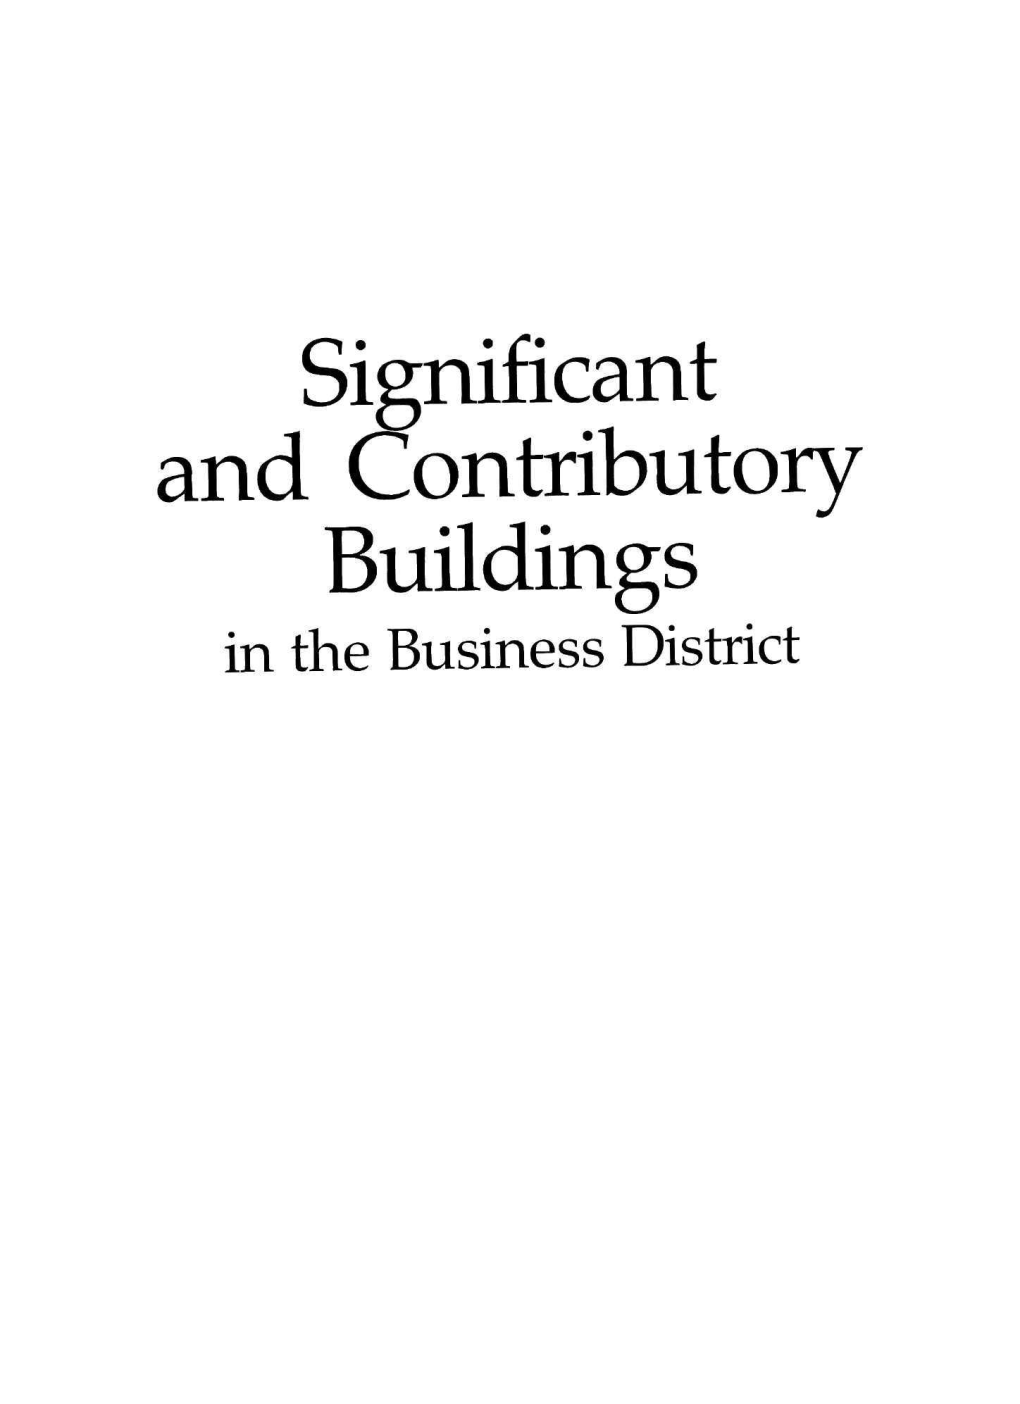 Significant and Contributory Buildings in the Business District